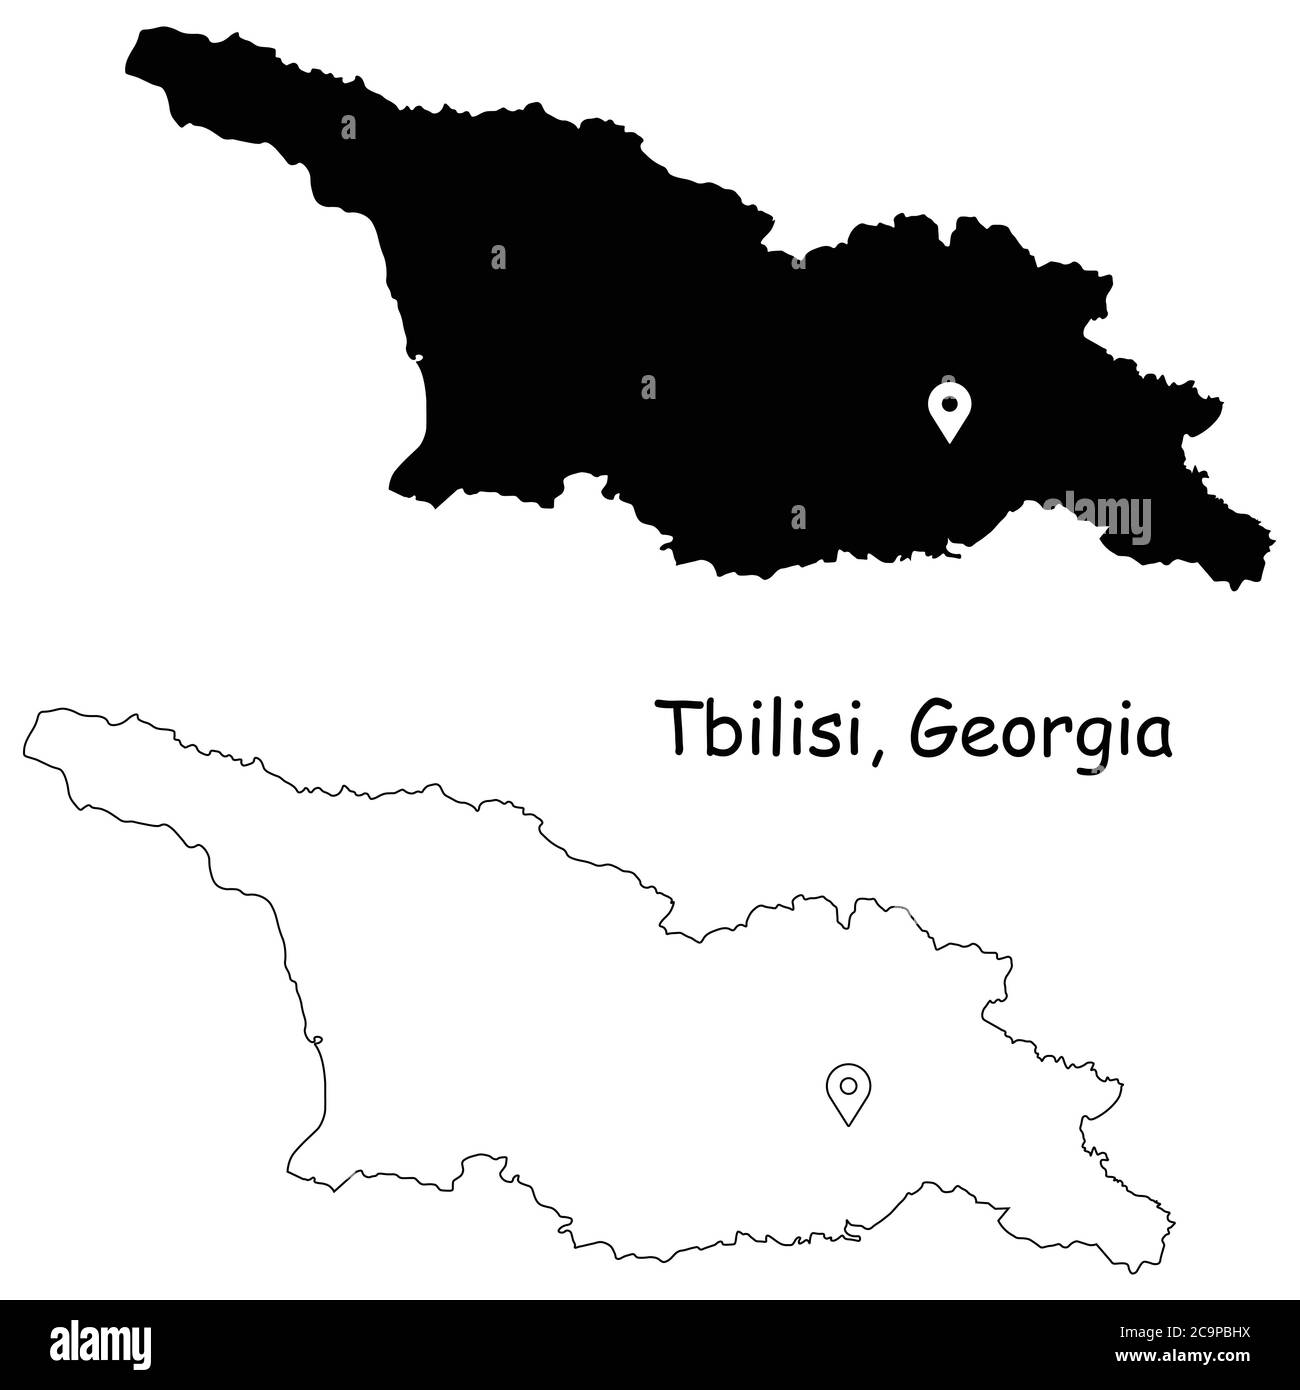 Tbilisi Georgia. Detailed Country Map with Location Pin on Capital City. Black silhouette and outline maps isolated on white background. EPS Vector Stock Vector